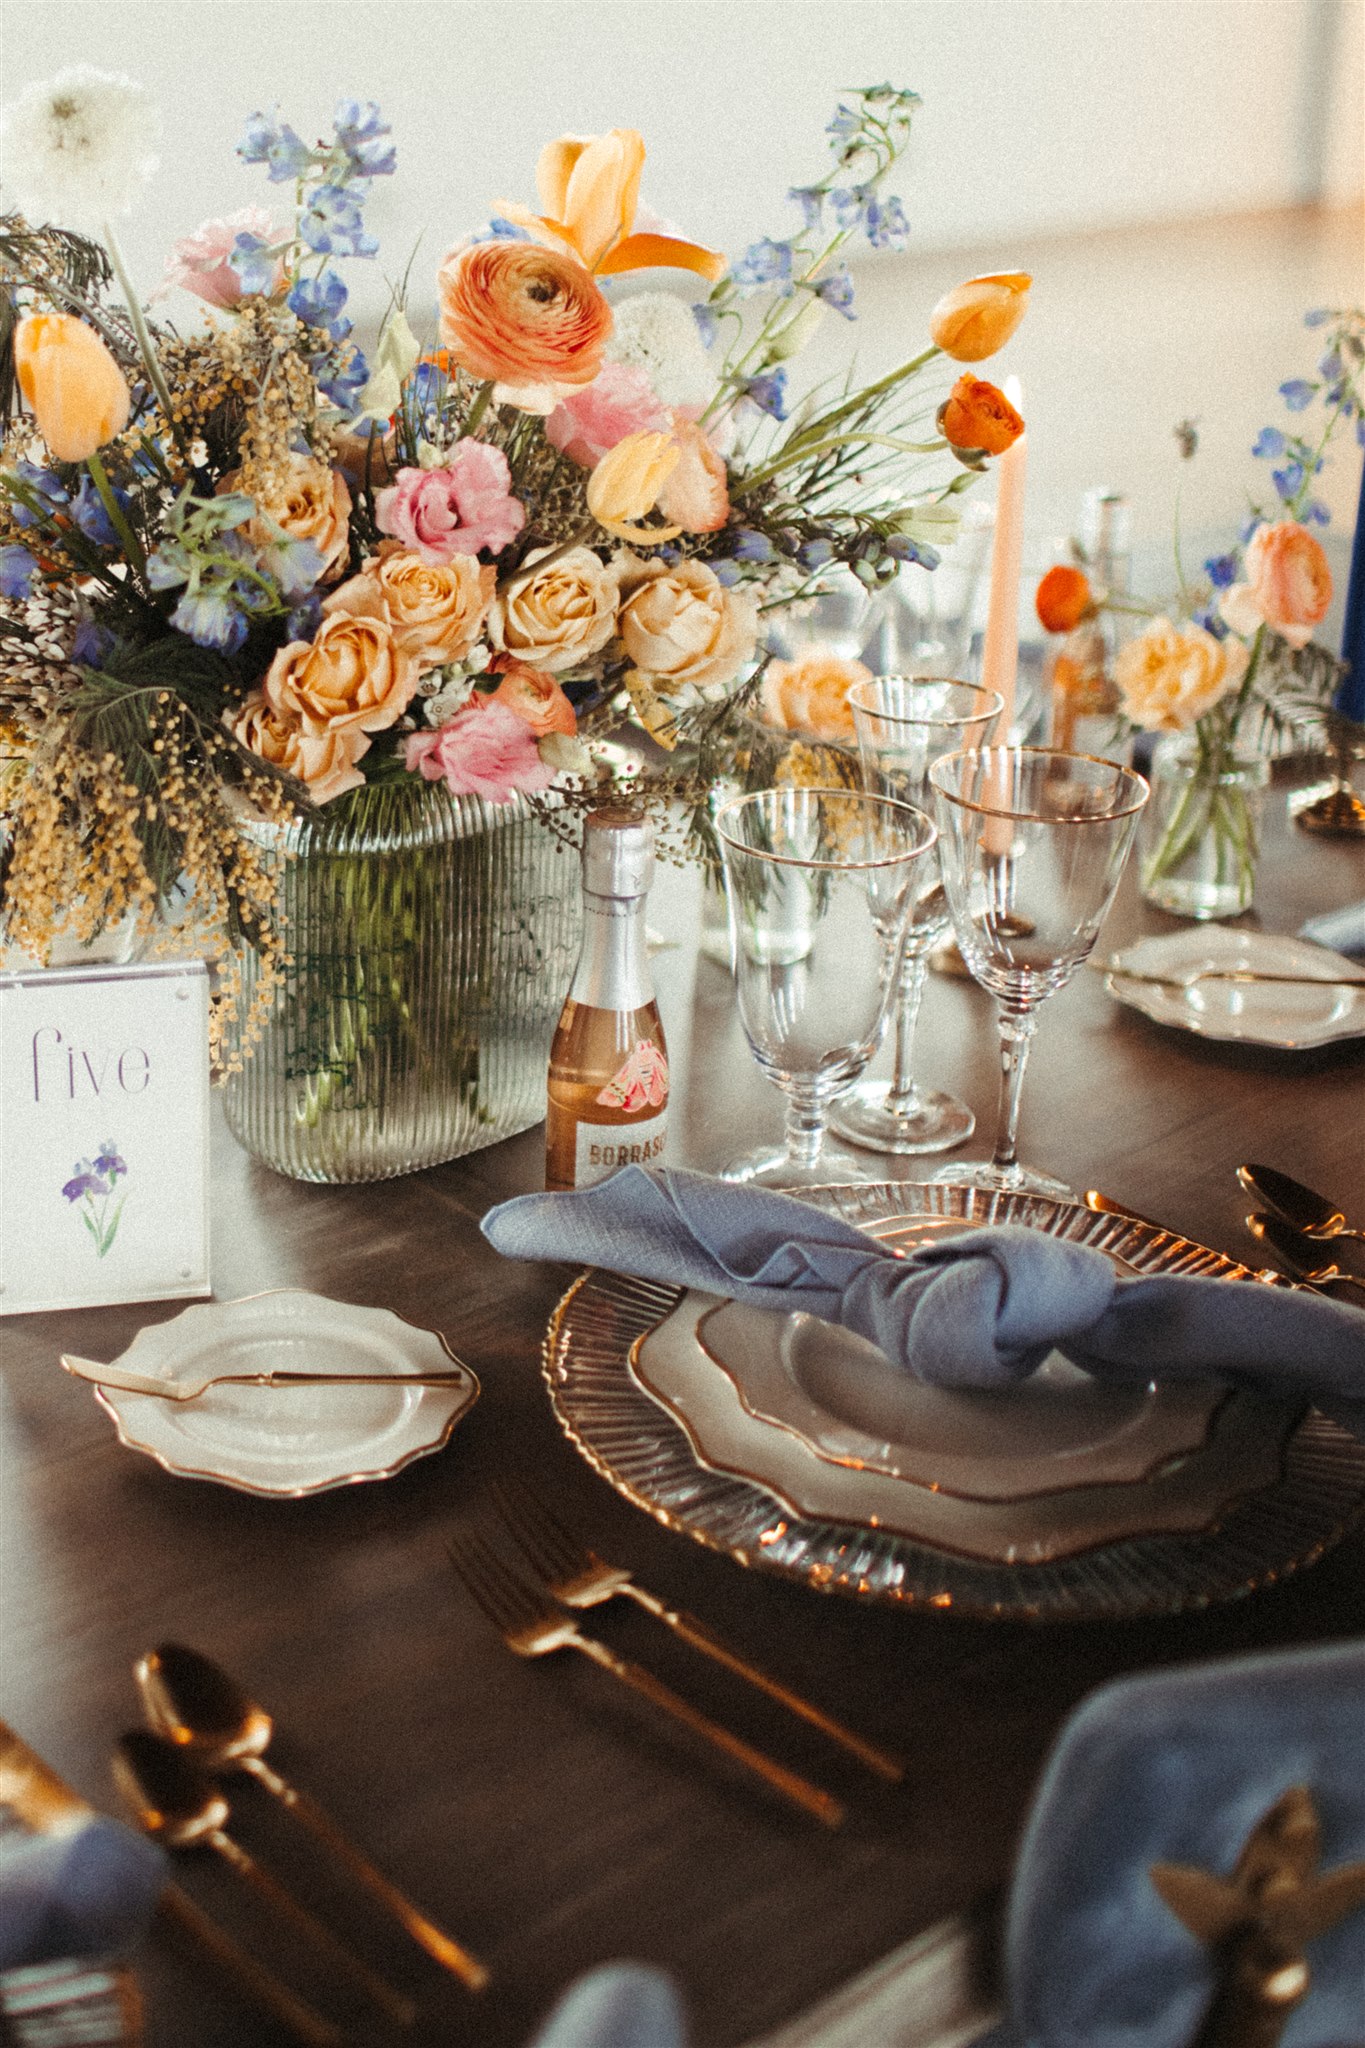 florals and glassware on table